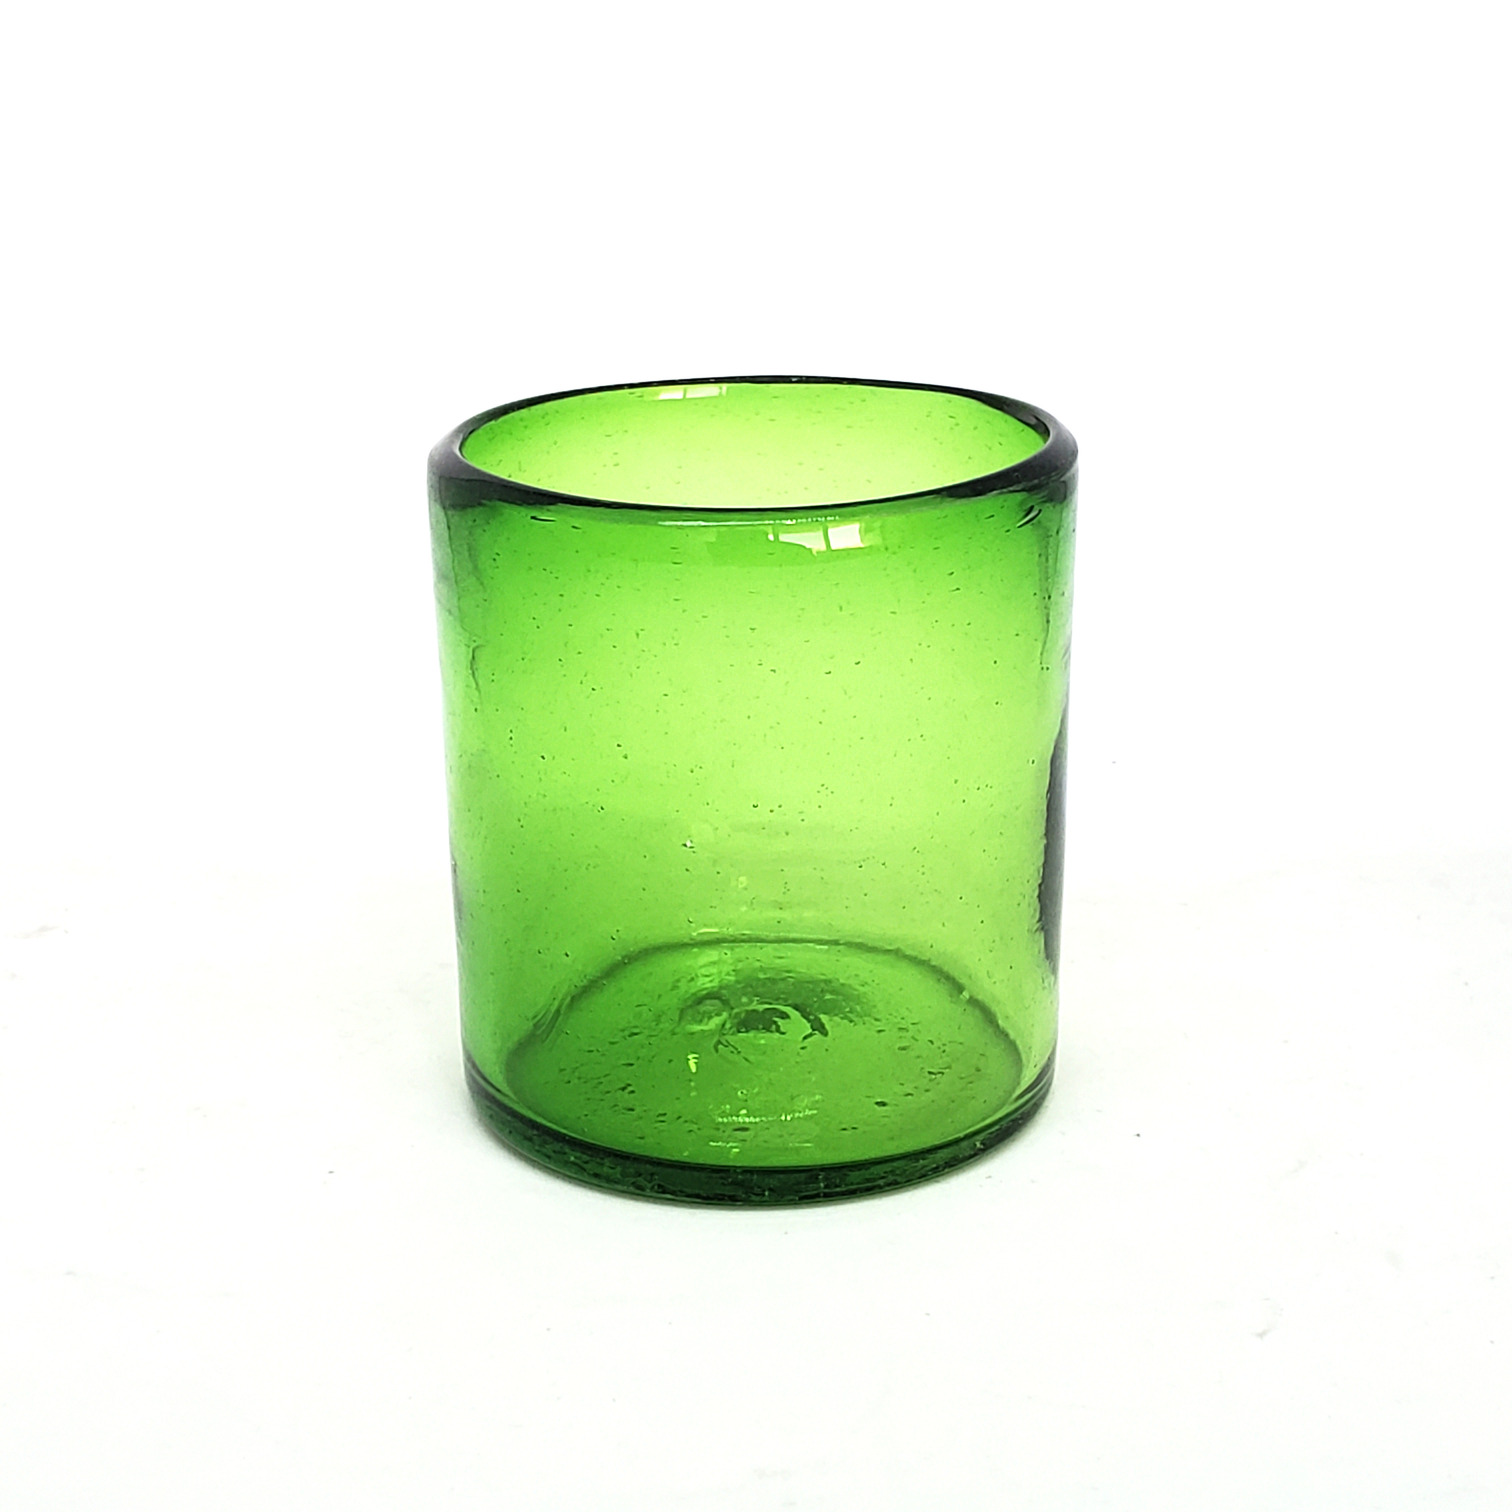 Colored Glassware / Solid Emerald Green 9 oz Short Tumblers (set of 6) / Enhance your favorite drink with these colorful handcrafted glasses.